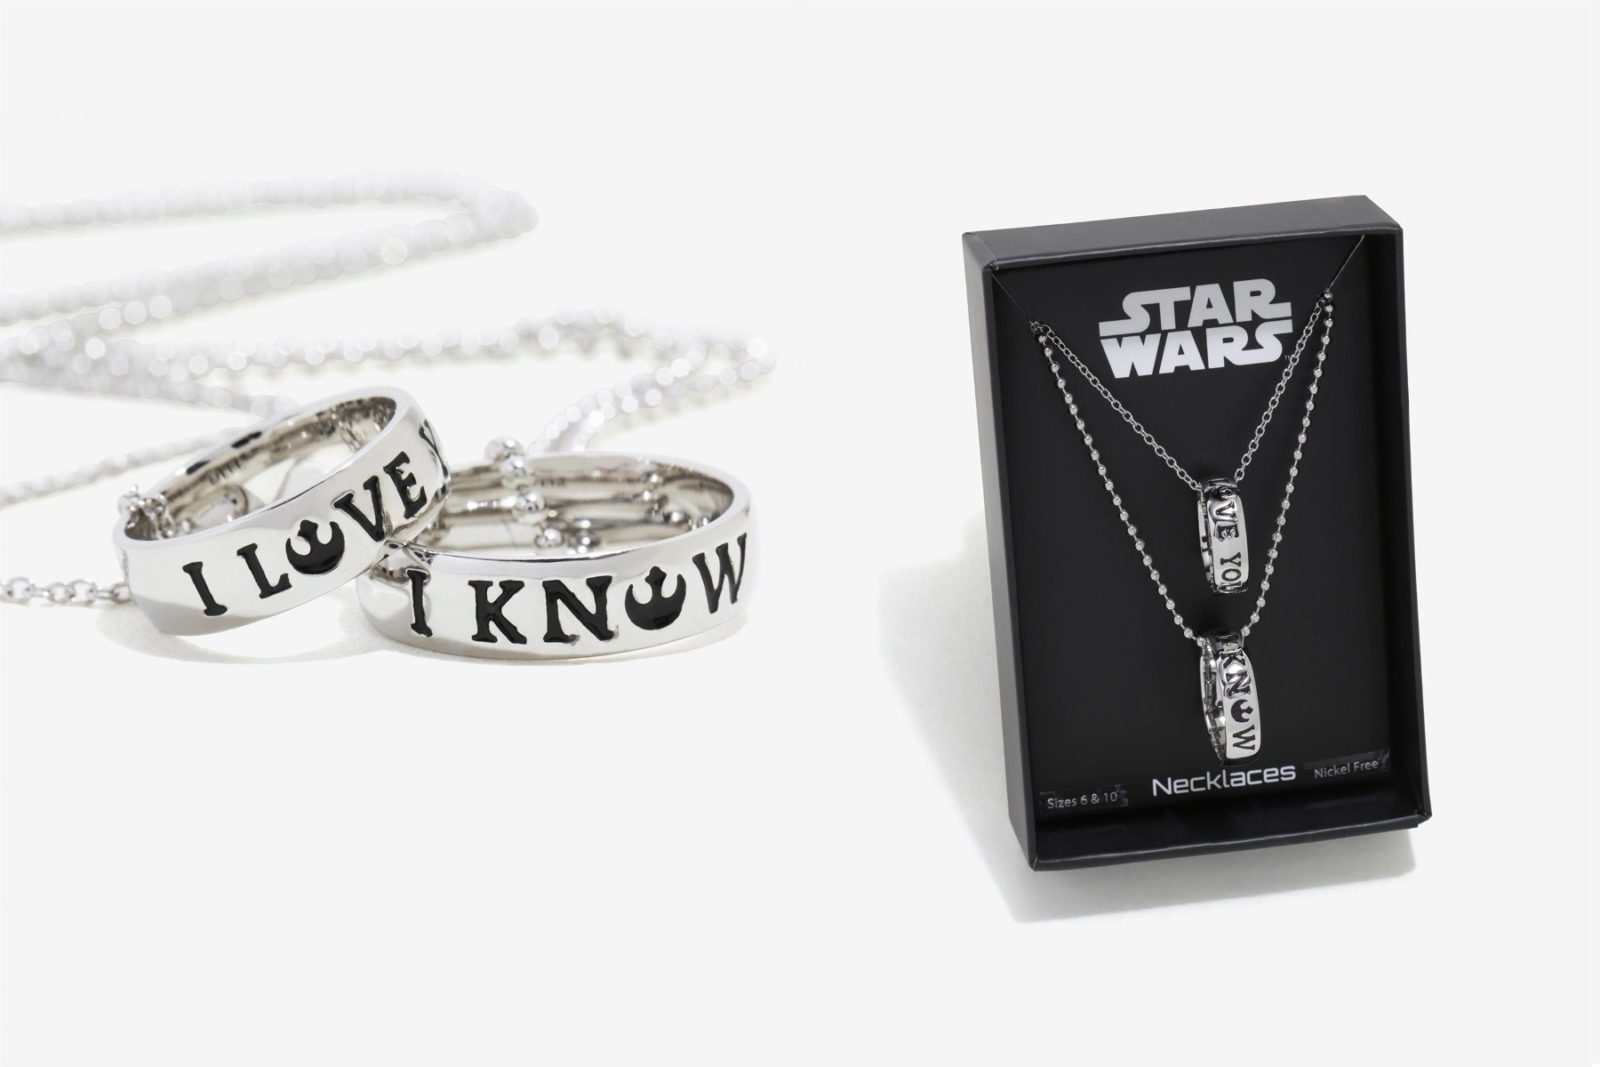 New ‘I Love You’ – ‘I Know’ ring necklace set